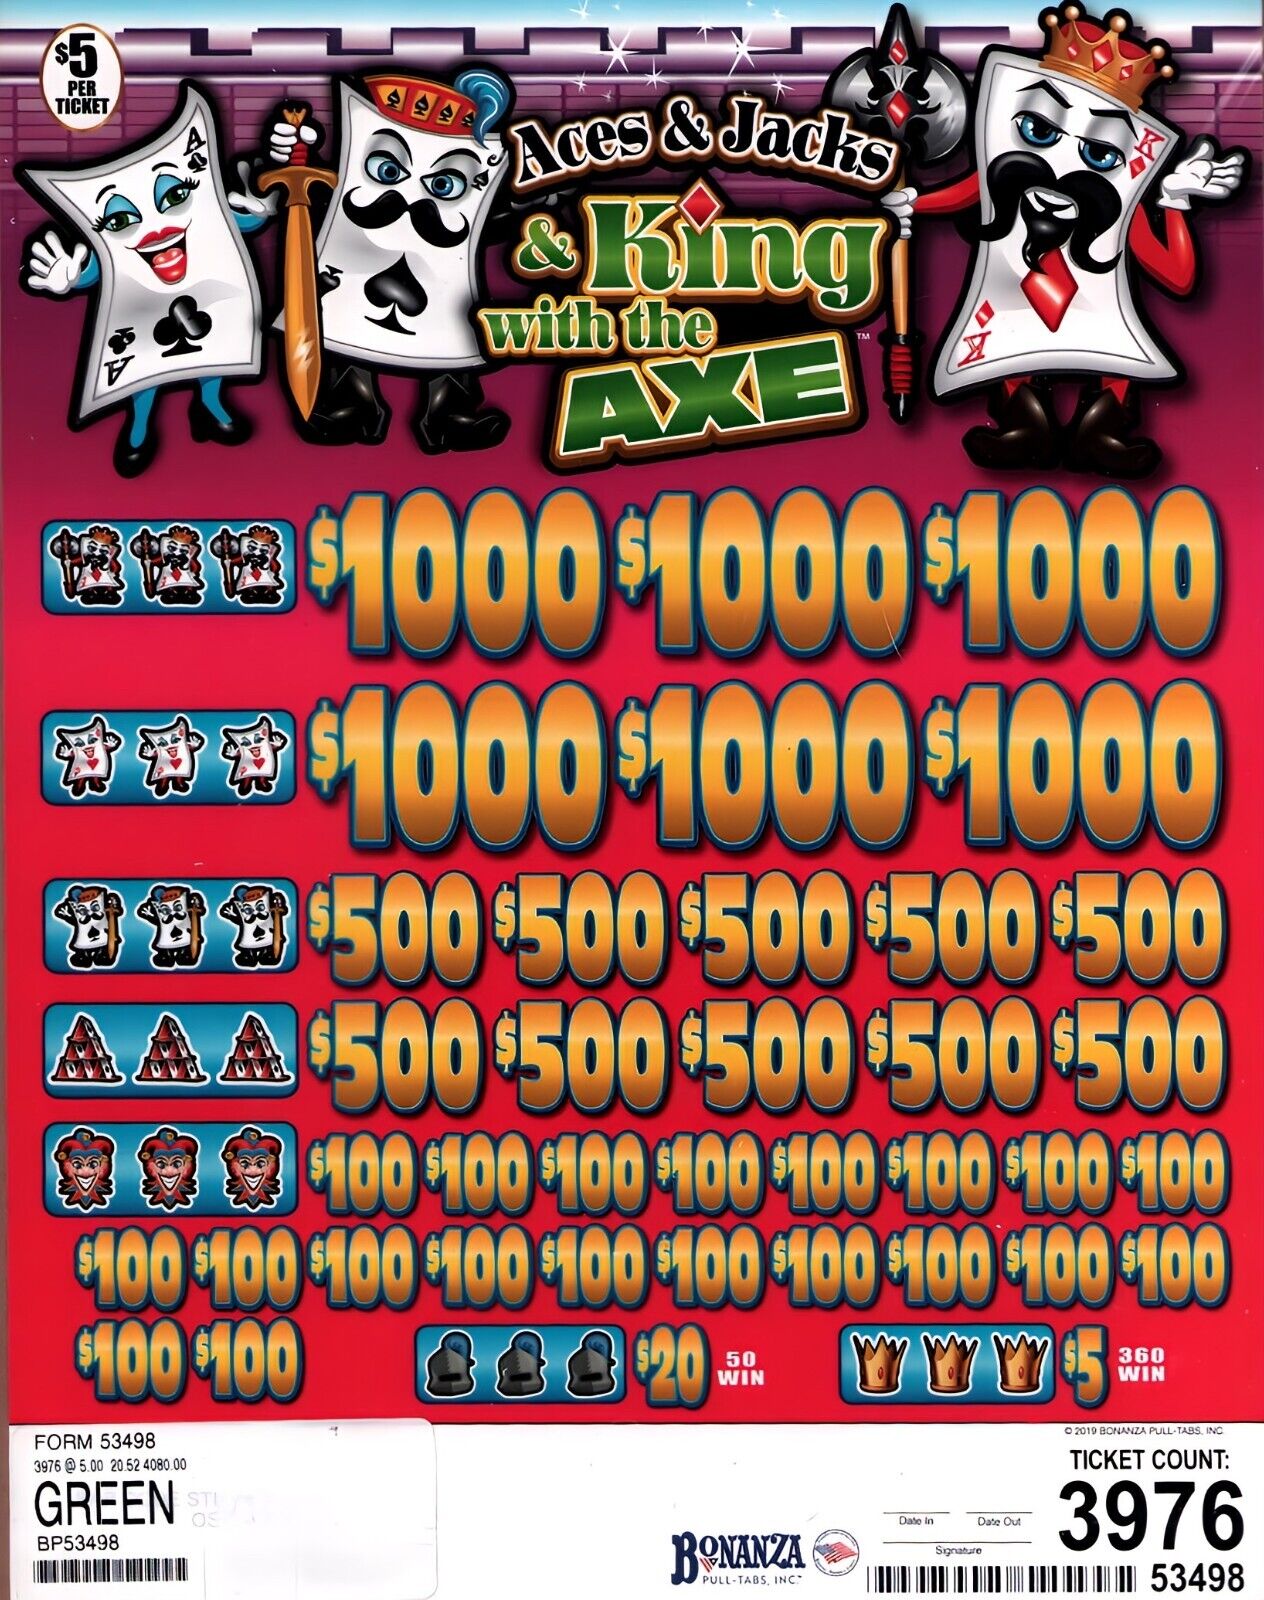 5 Window Pull Tab Tickets Game - Aces and Jacks & Kings with the Axe $5